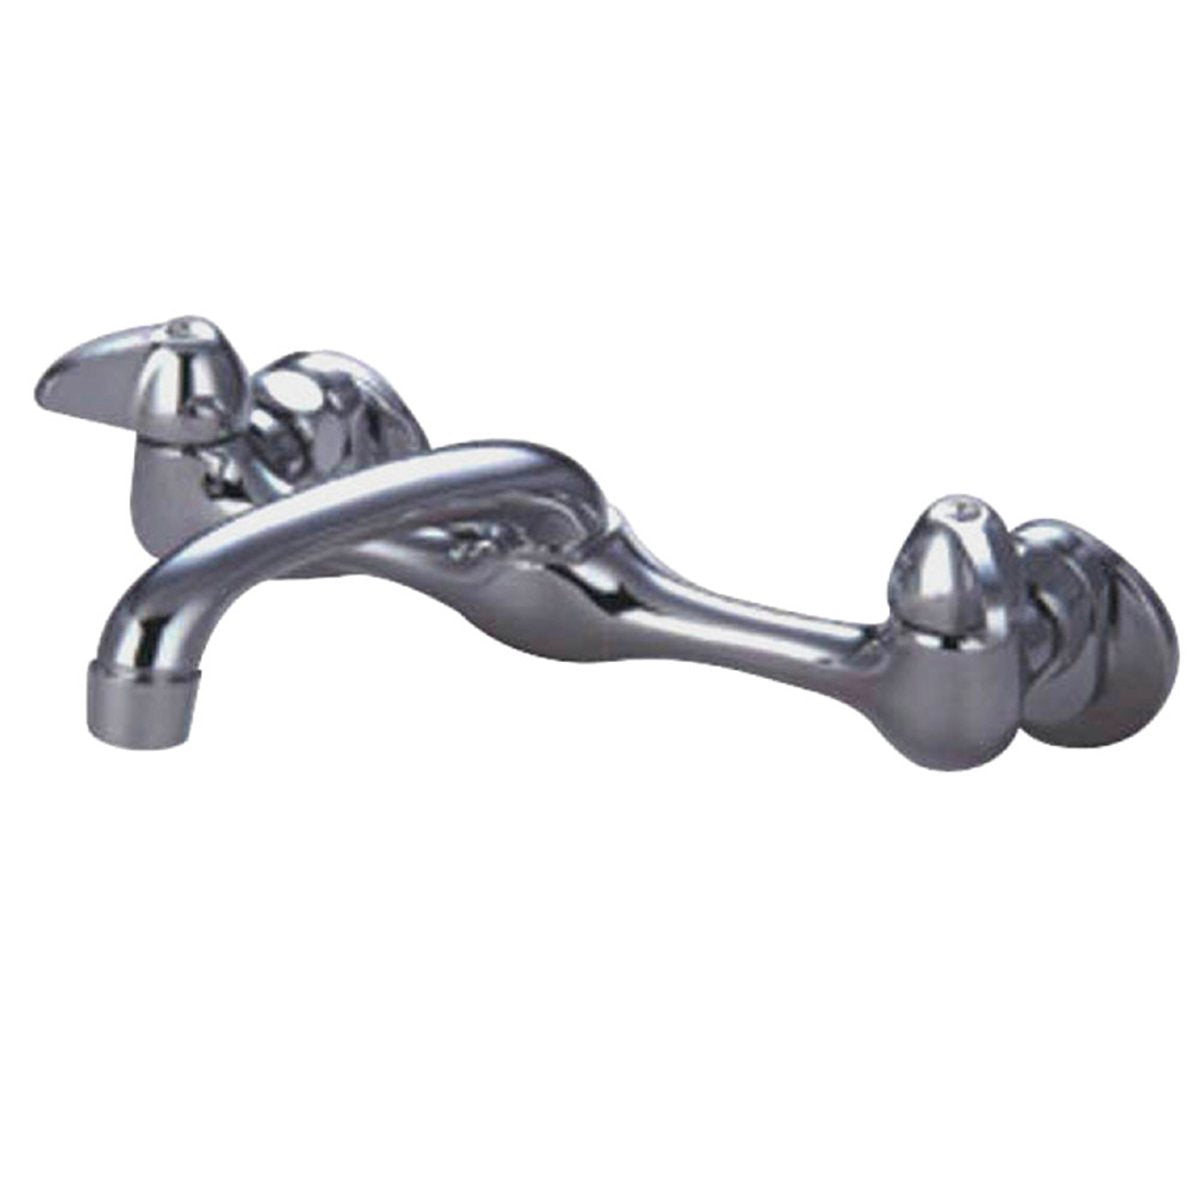 Kingston Brass Proseal 8-Inch Adjustable Centers Wall Mount Kitchen Faucet in Polished Chrome